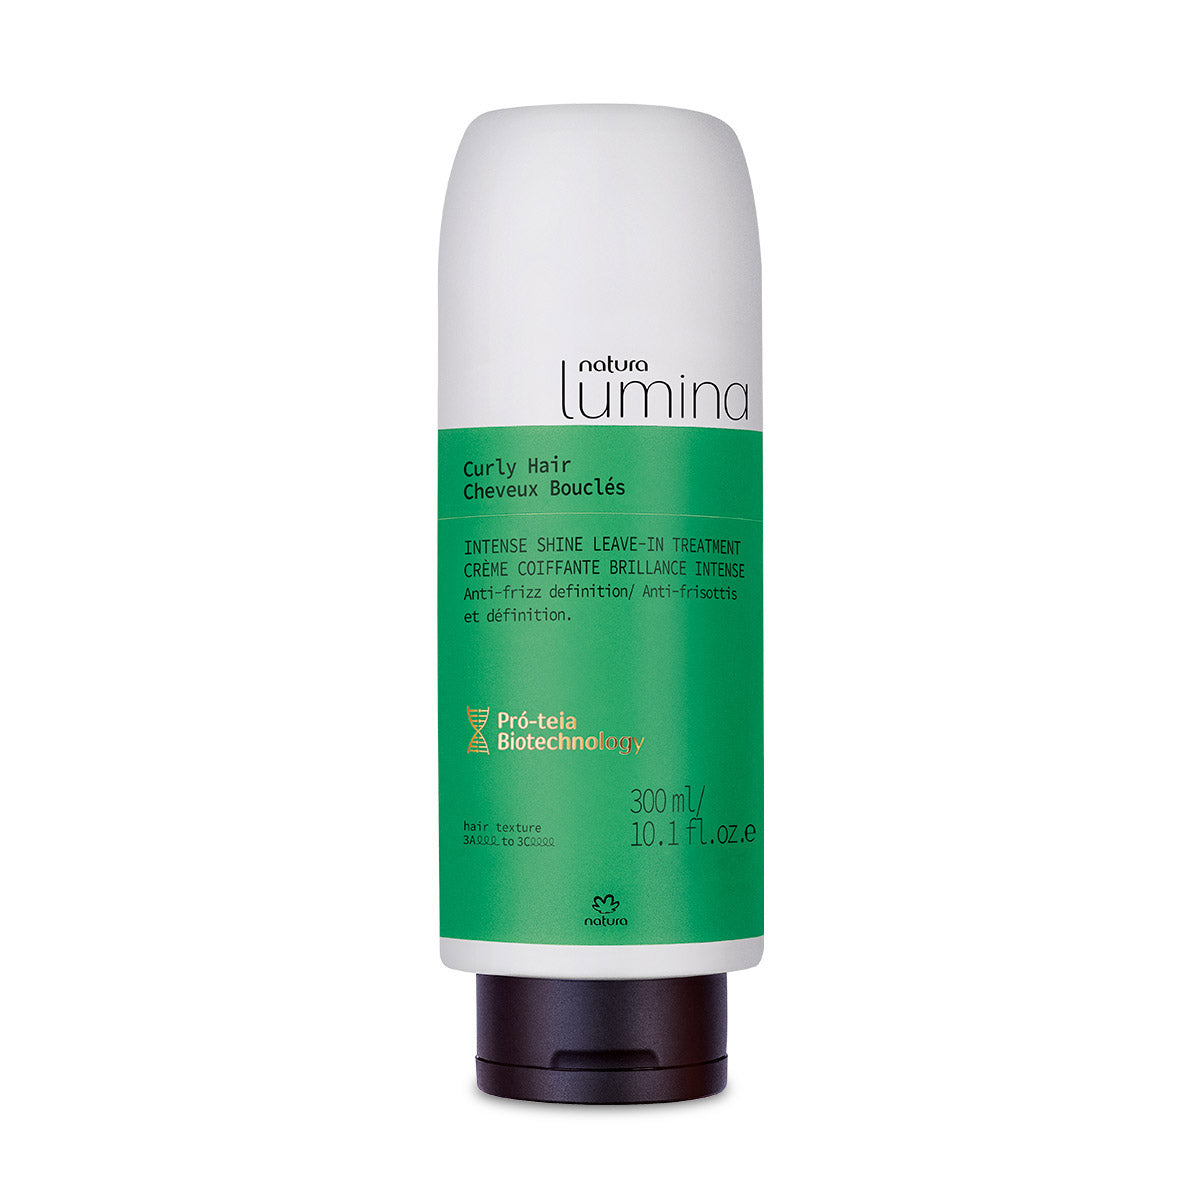 Curly Hair Int. Shine Leave-In Treatment 300ml